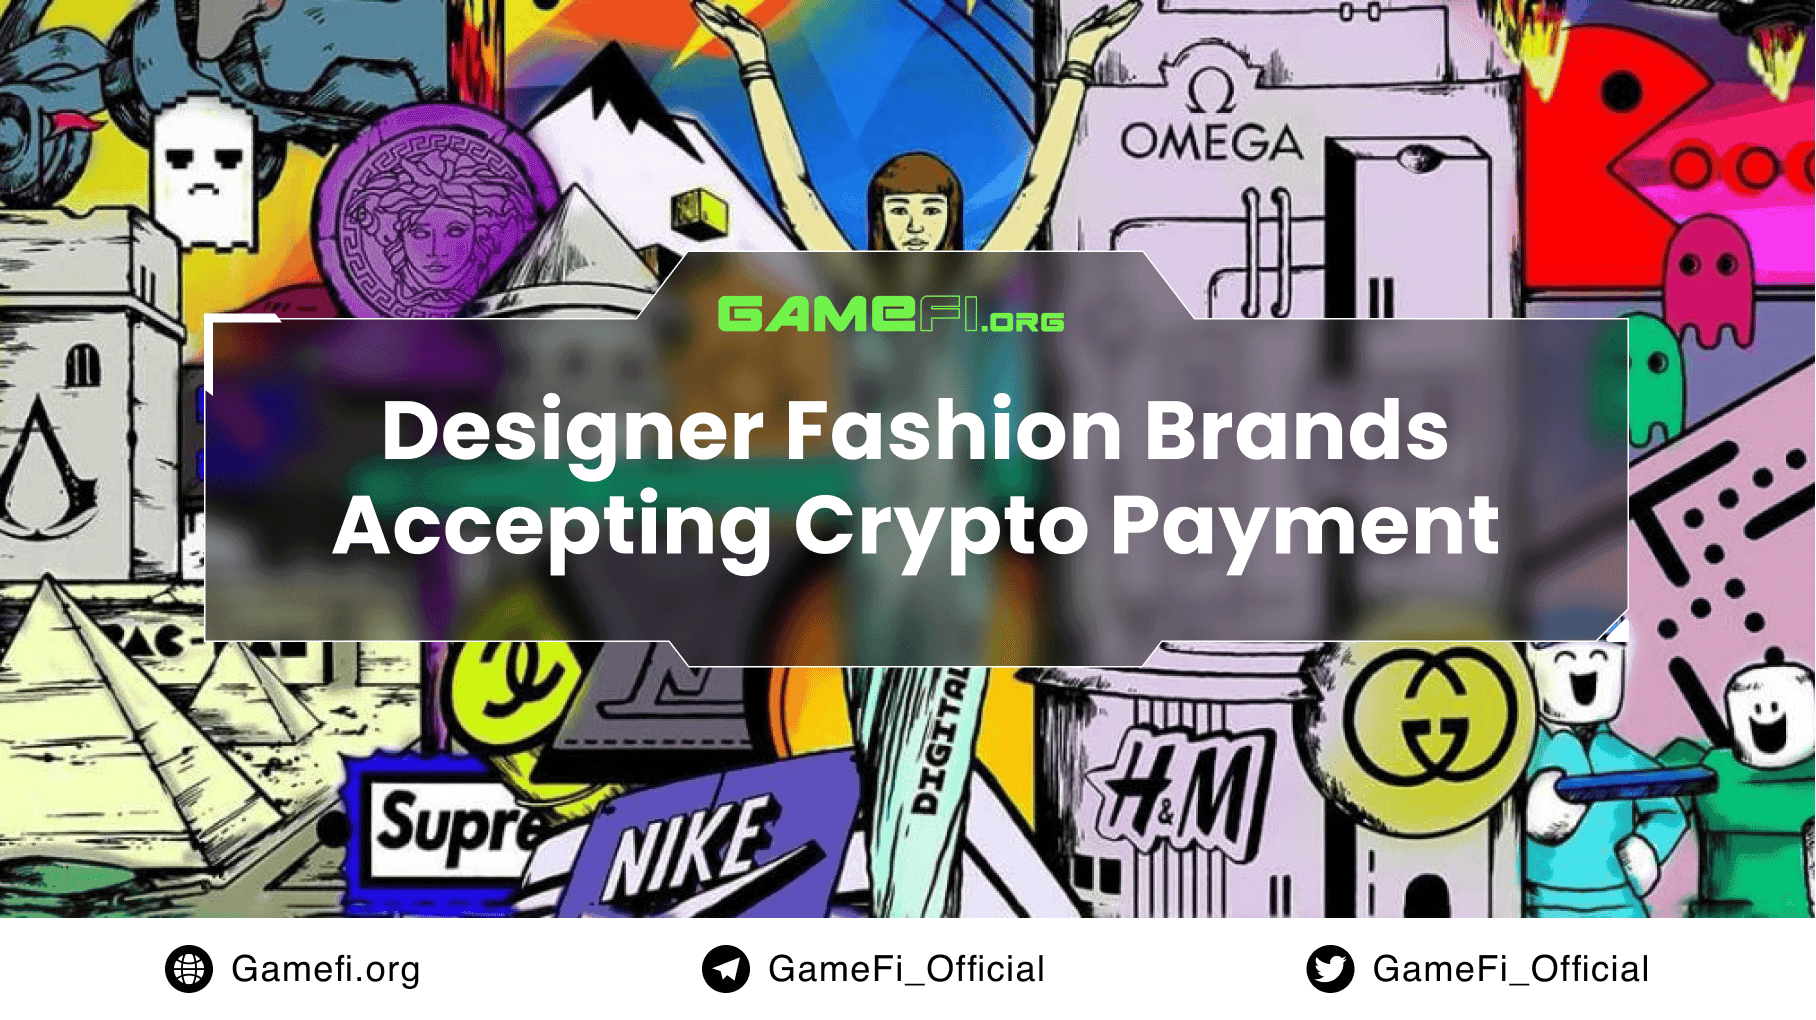 Designer Fashion Brands Accepting Crypto Payment